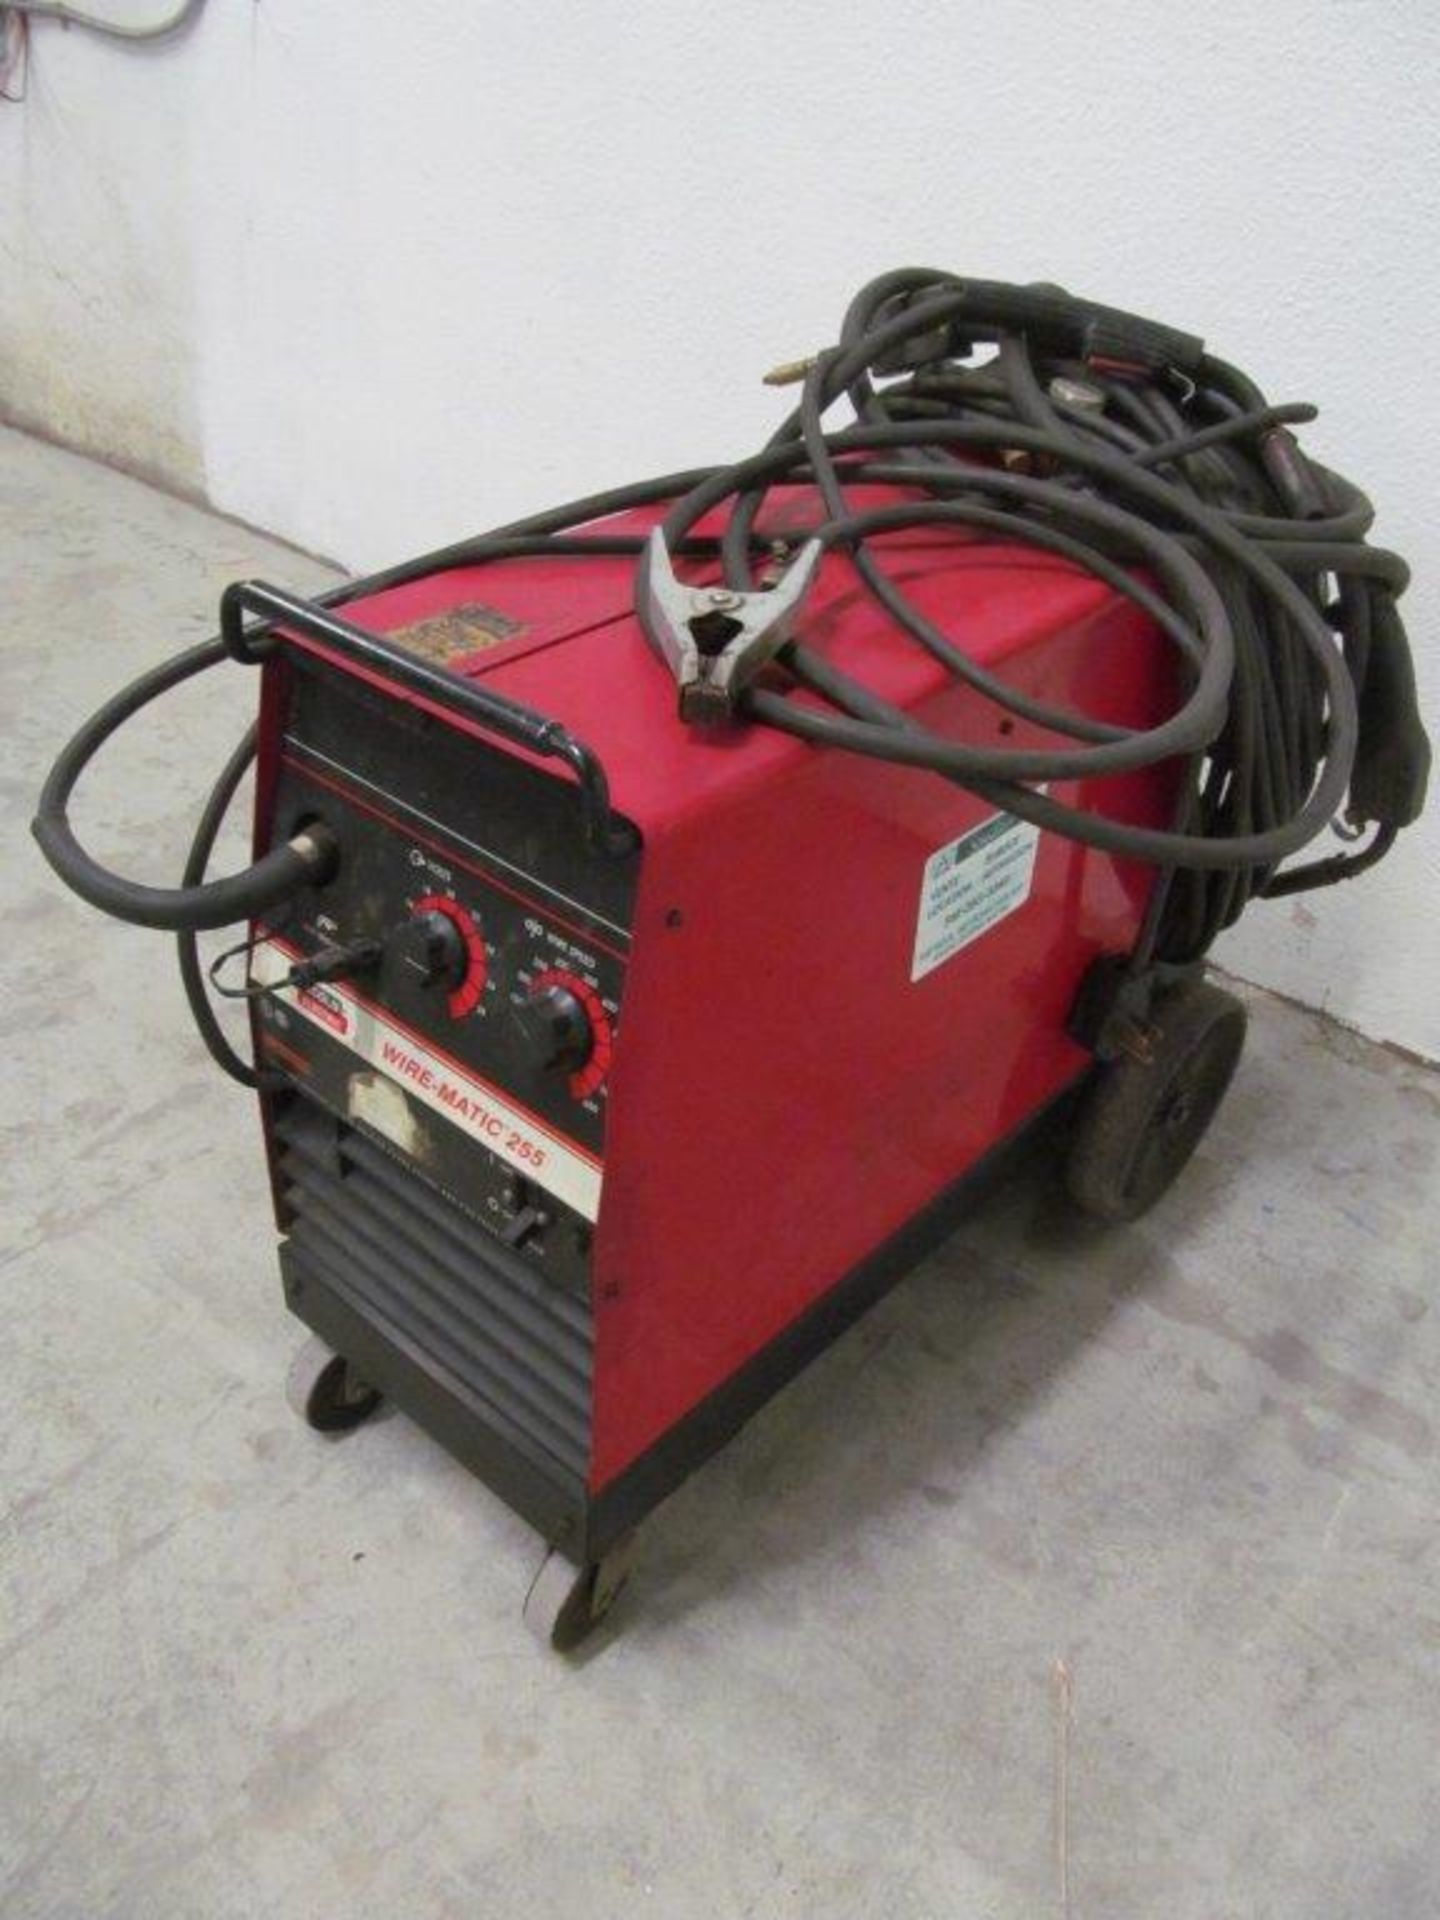 LINCOLN WIRE-MATIC 255 DC WELDER WITH WIRE FEEDER, S/N: U1950319563, ELECTRICS: 208V/230V/3PH/60C - Image 3 of 4